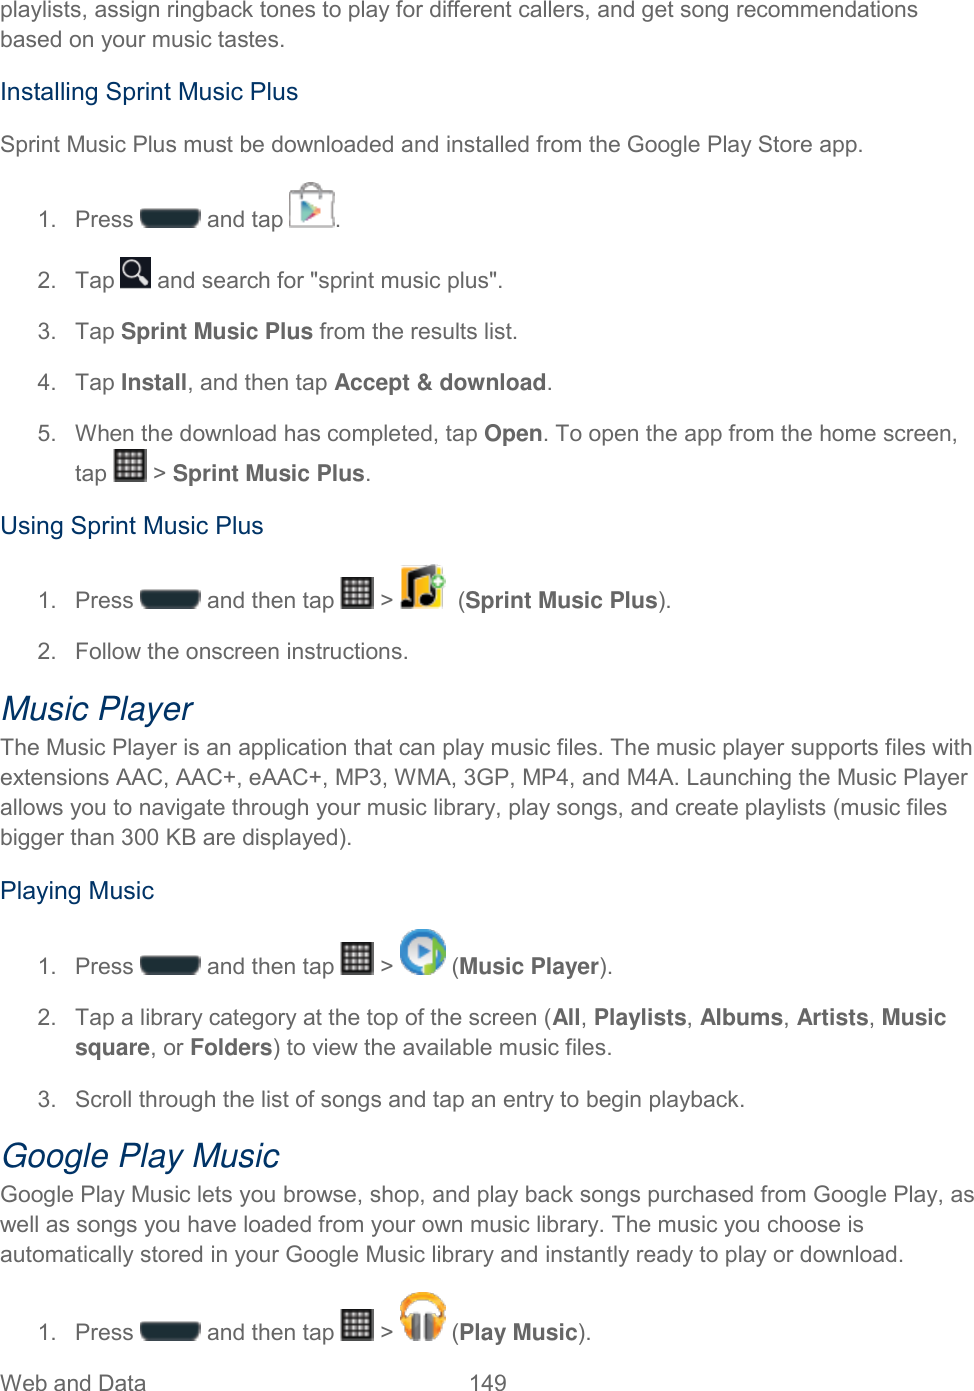 Web and Data  149   playlists, assign ringback tones to play for different callers, and get song recommendations based on your music tastes. Installing Sprint Music Plus Sprint Music Plus must be downloaded and installed from the Google Play Store app. 1.  Press   and tap  . 2.  Tap   and search for &quot;sprint music plus&quot;. 3.  Tap Sprint Music Plus from the results list. 4.  Tap Install, and then tap Accept &amp; download. 5.  When the download has completed, tap Open. To open the app from the home screen, tap   &gt; Sprint Music Plus. Using Sprint Music Plus 1.  Press   and then tap   &gt;    (Sprint Music Plus).  2.  Follow the onscreen instructions. Music Player The Music Player is an application that can play music files. The music player supports files with extensions AAC, AAC+, eAAC+, MP3, WMA, 3GP, MP4, and M4A. Launching the Music Player allows you to navigate through your music library, play songs, and create playlists (music files bigger than 300 KB are displayed). Playing Music 1.  Press   and then tap   &gt;   (Music Player).  2.  Tap a library category at the top of the screen (All, Playlists, Albums, Artists, Music square, or Folders) to view the available music files. 3.  Scroll through the list of songs and tap an entry to begin playback. Google Play Music Google Play Music lets you browse, shop, and play back songs purchased from Google Play, as well as songs you have loaded from your own music library. The music you choose is automatically stored in your Google Music library and instantly ready to play or download. 1.  Press   and then tap   &gt;   (Play Music).  